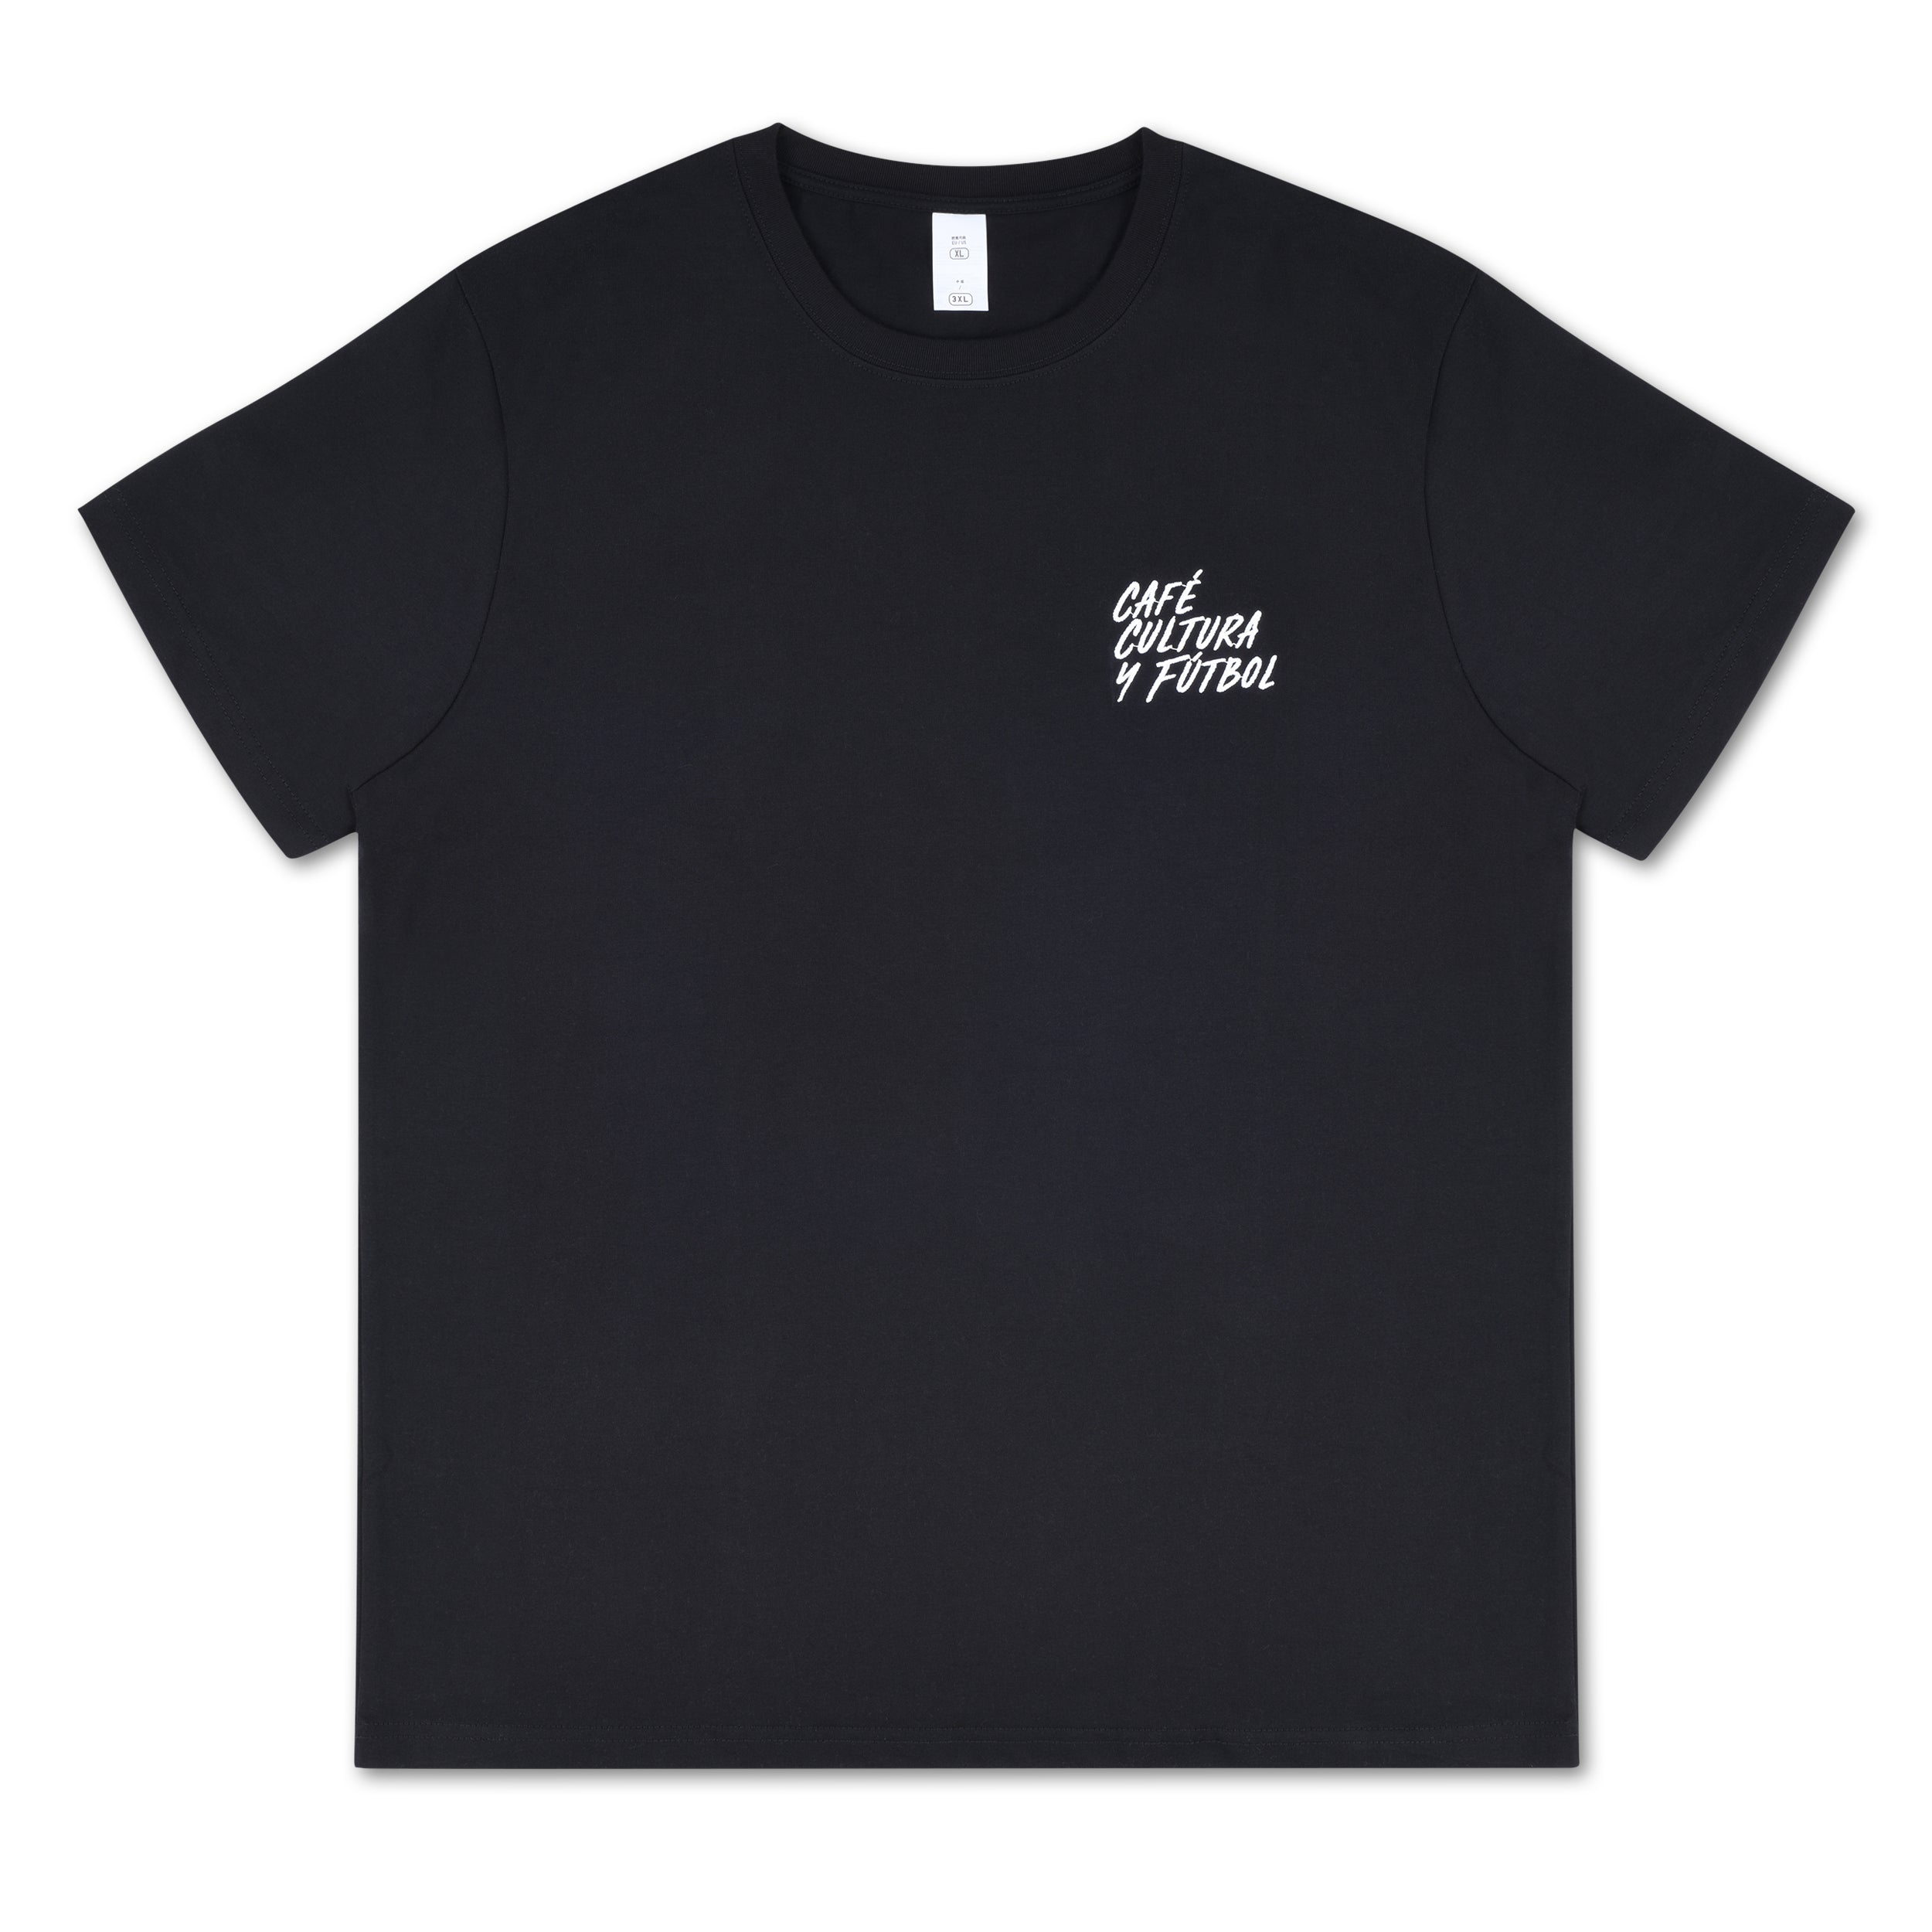 Black t-shirt with cafe, cultura, y futbol logo on the front 